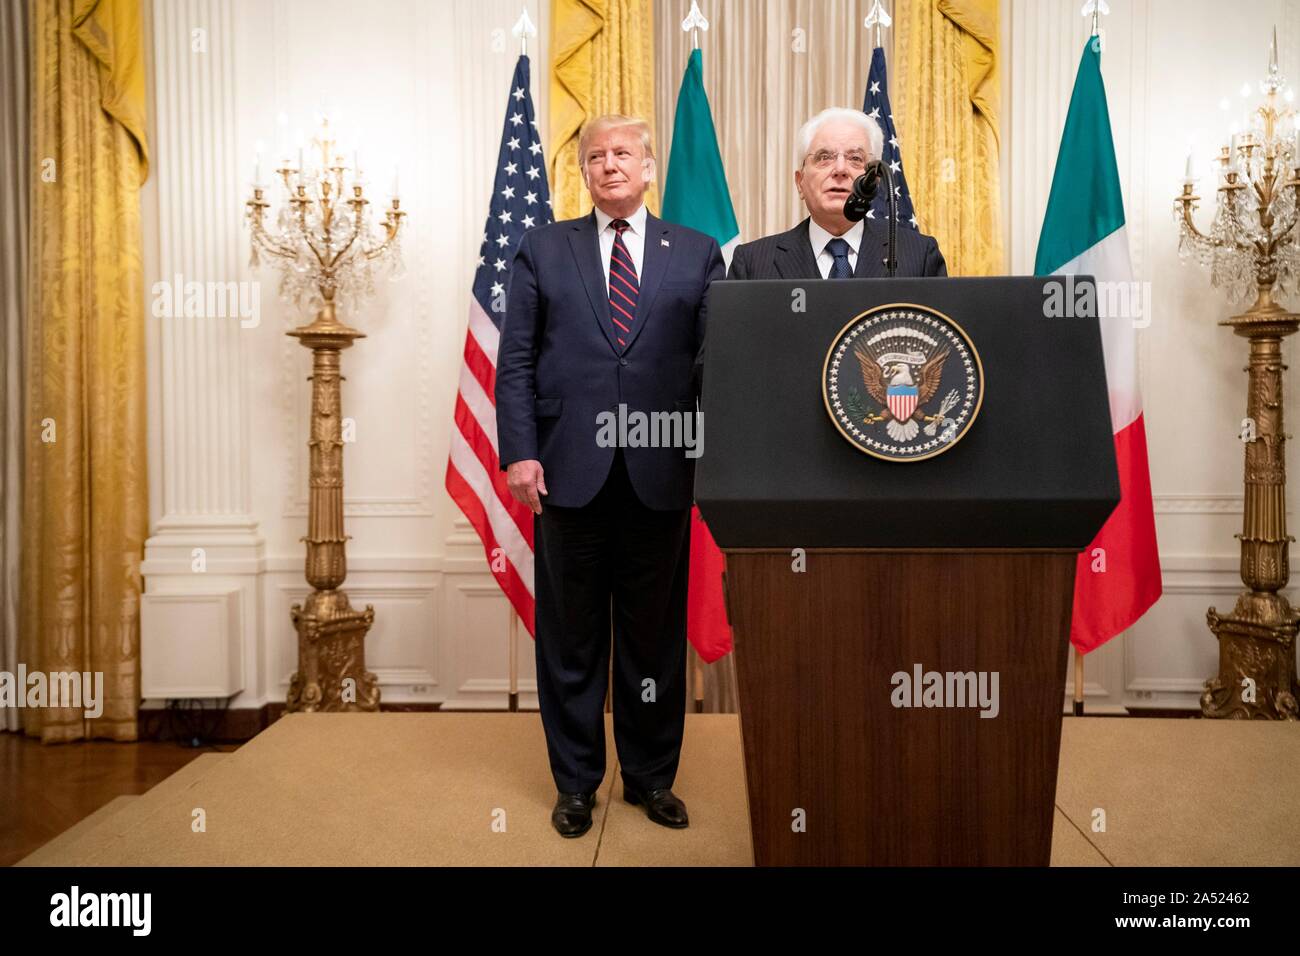 Washington, United States of America. 16 October, 2019. U.S President Donald Trump, left, looks on as Italian President Sergio Mattarella delivers remarks during a reception in the East Room of the White House October 16, 2019 in Washington, DC. Credit: Tia Dufour/White House Photo/Alamy Live News Stock Photo